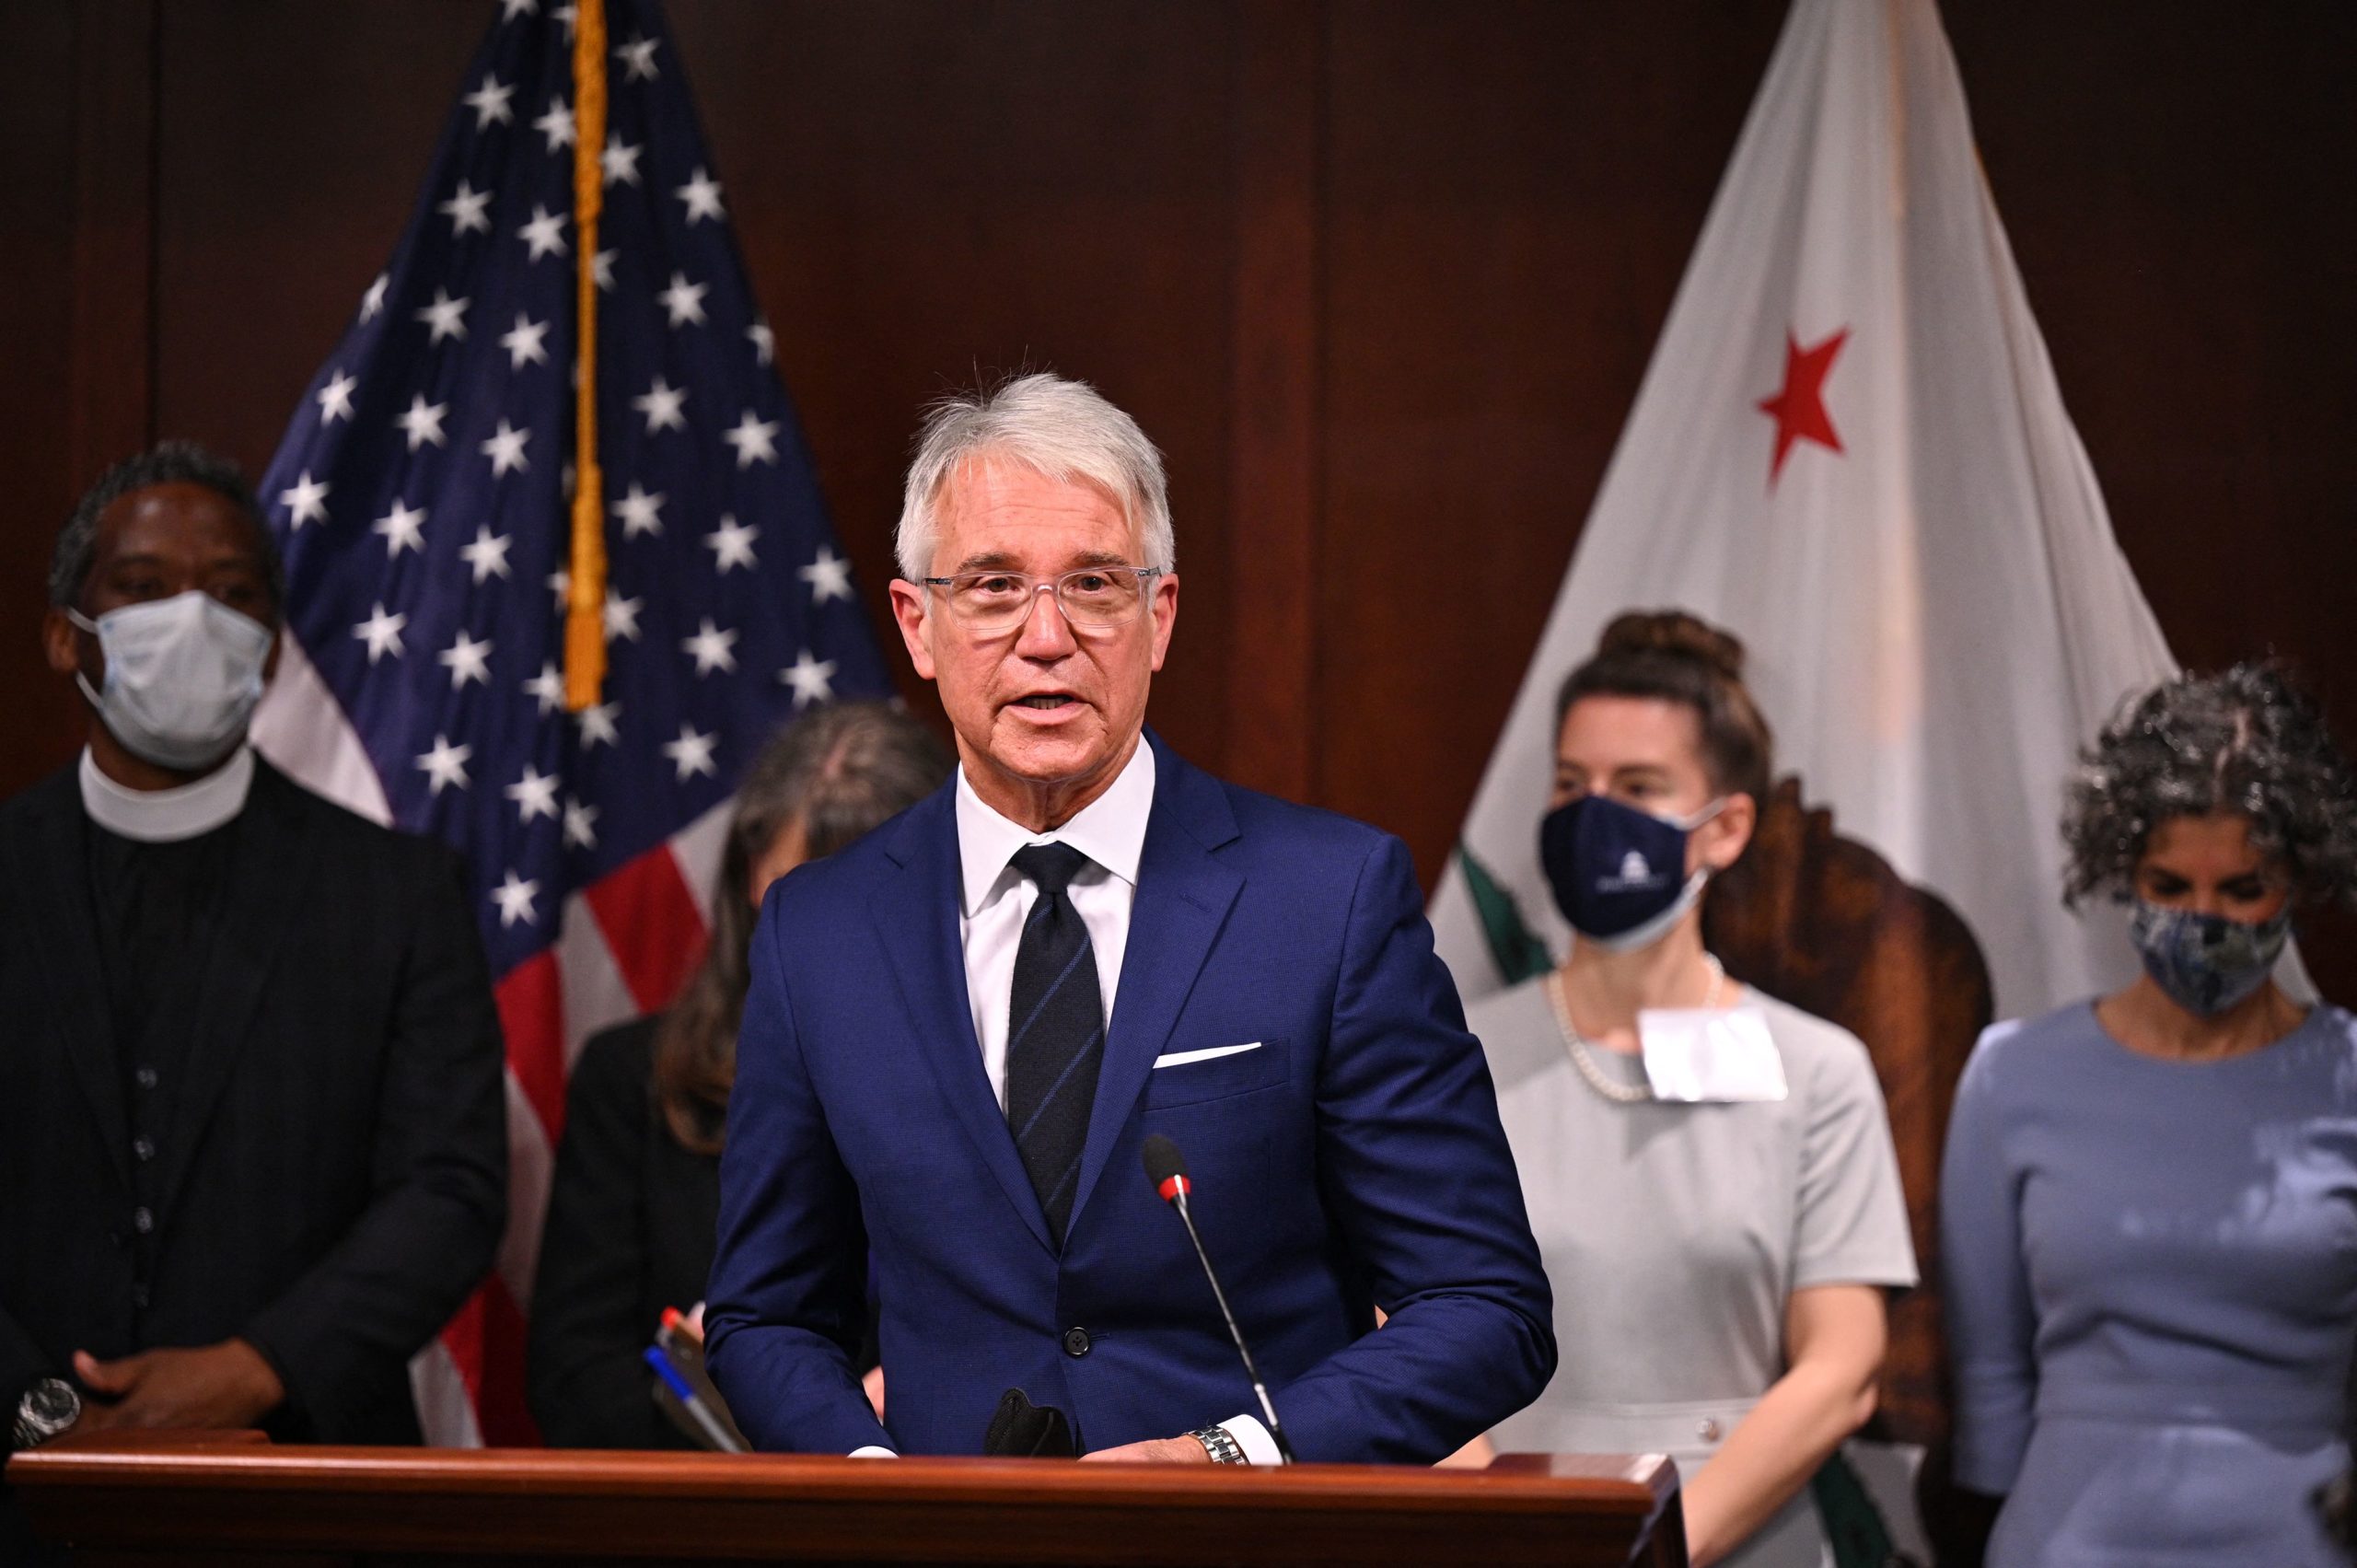 Los Angeles County District Attorney George Gascon speaks at a press conference, December 8, 2021 in Los Angeles, California. - Gascon was joined by a group of district attorneys from around the country at the press conference that was called for the accomplishments of his first year in office. (Photo by ROBYN BECK/AFP via Getty Images)